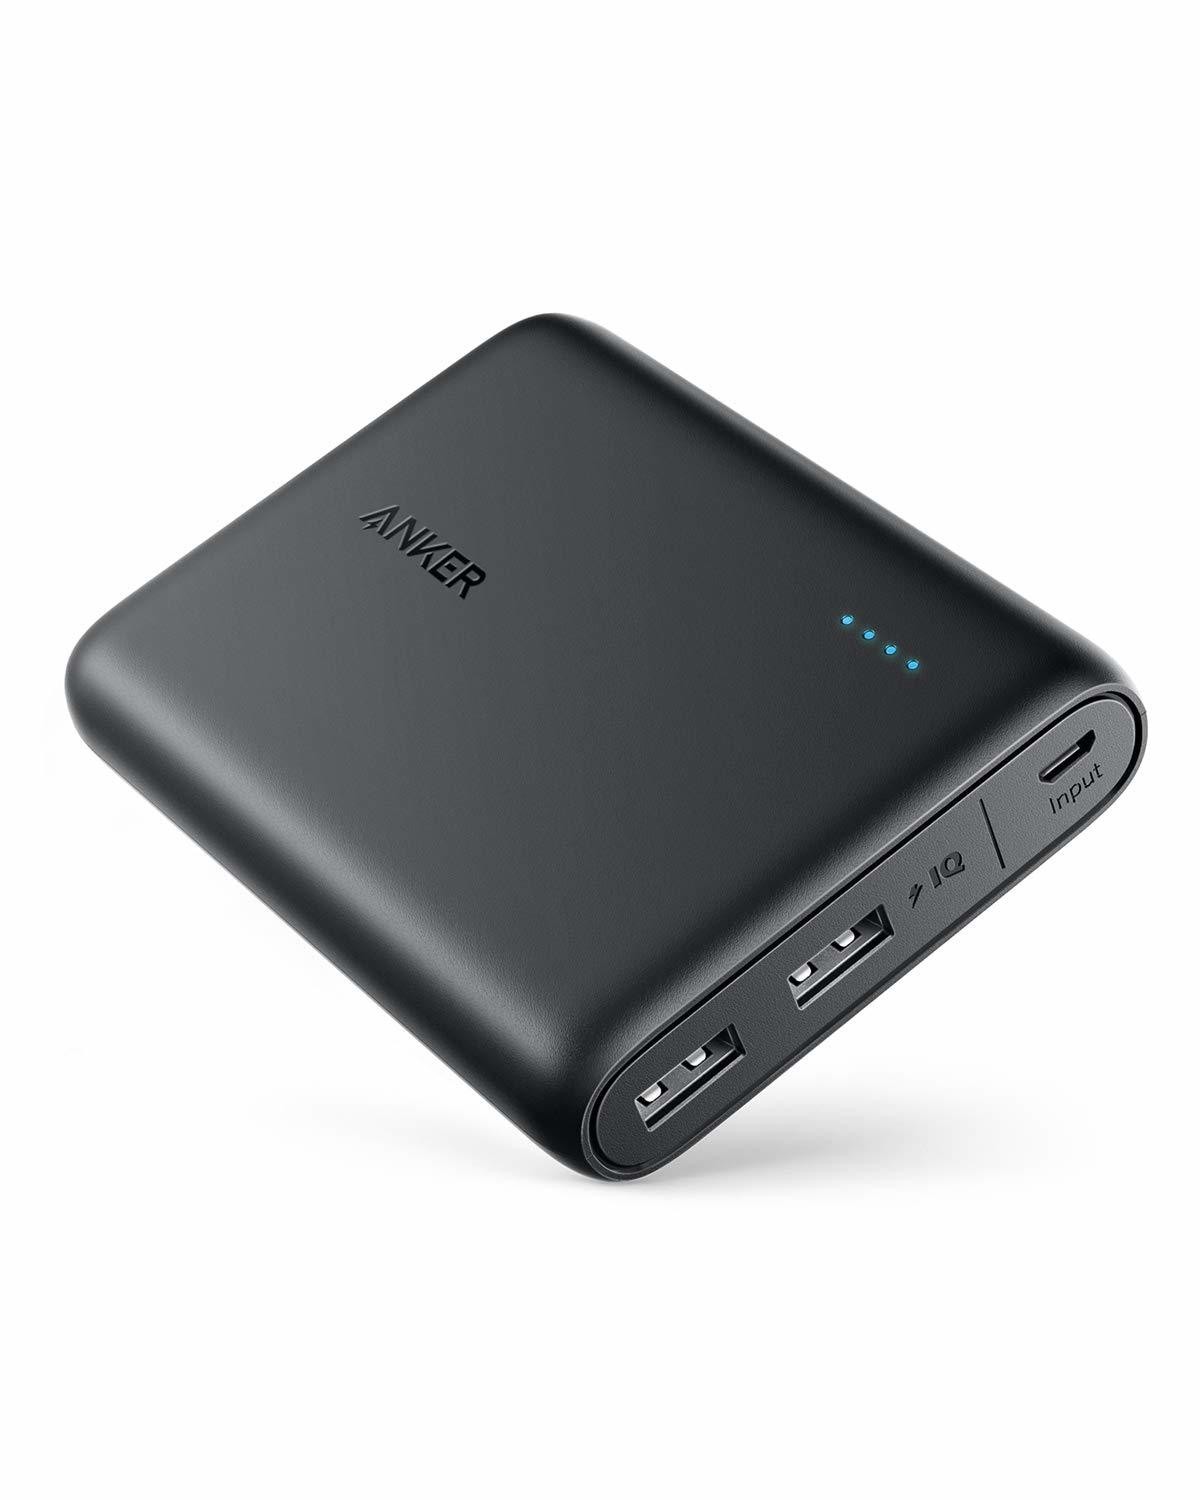 Anker PowerCore 13000, Compact 13000mAh 2-Port Ultra-Portable Phone Charger Power Bank with PowerIQ and VoltageBoost Technology for iPhone, iPad, Samsung Galaxy -